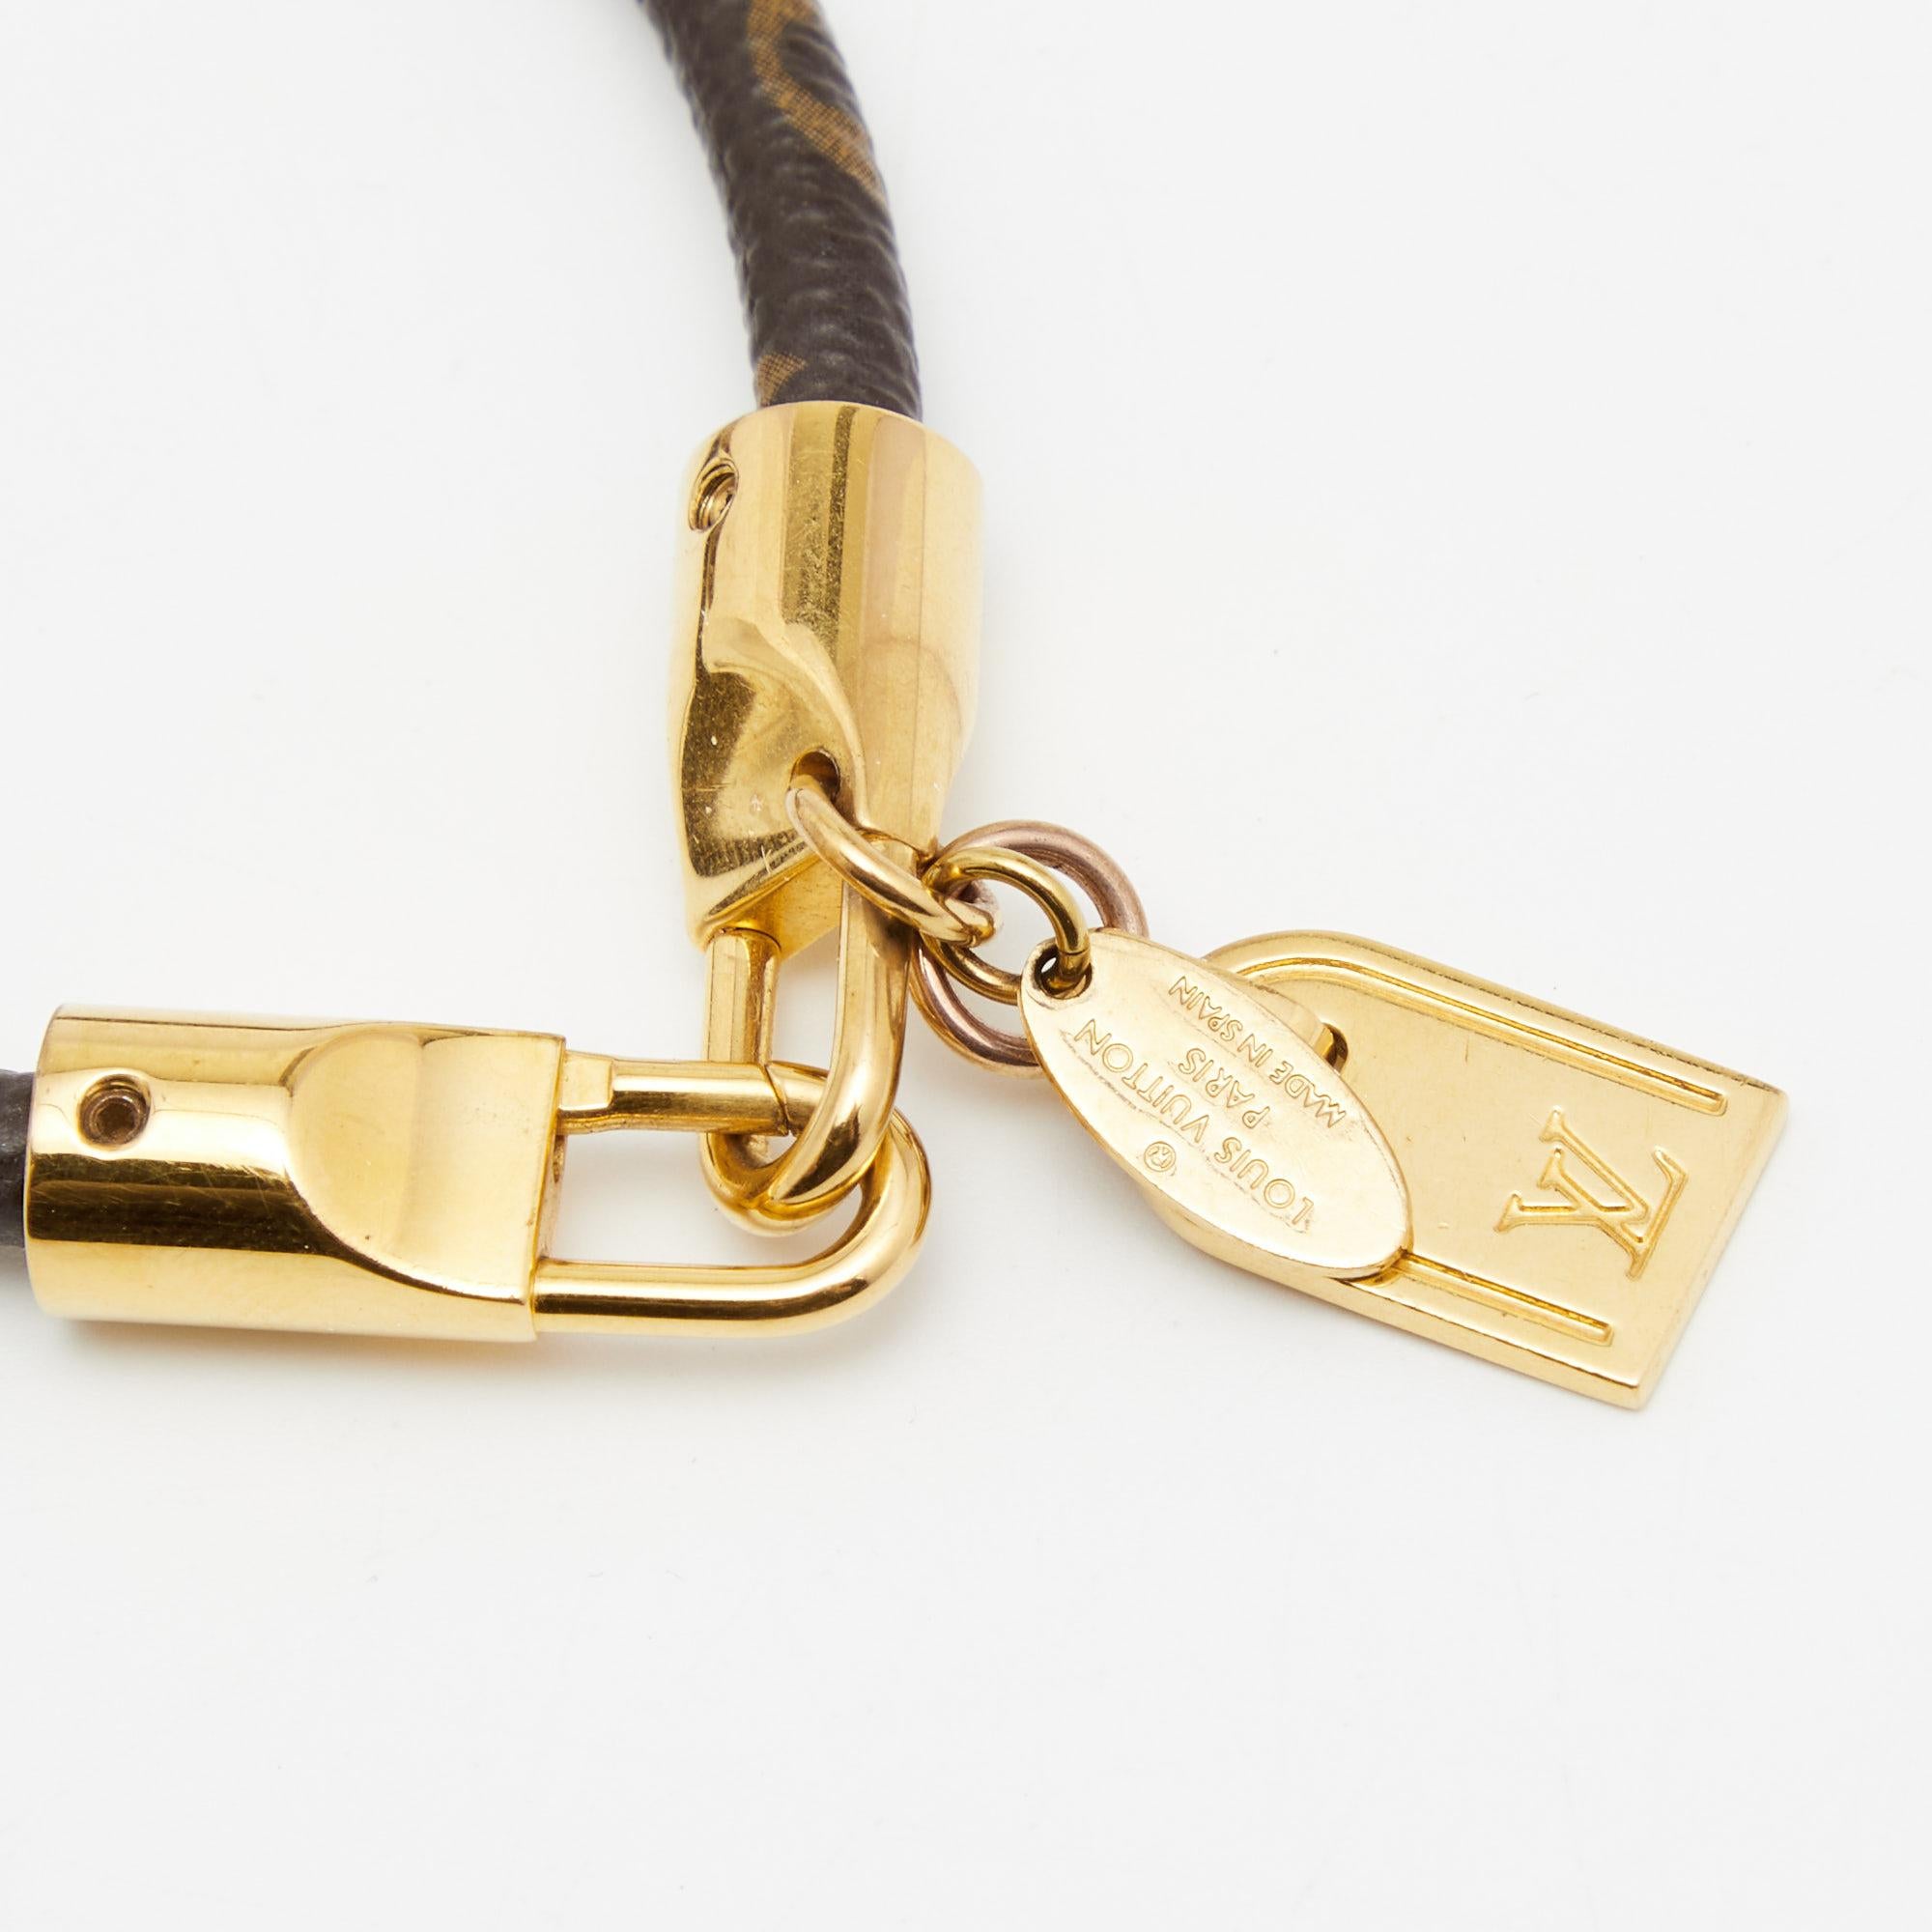 Adorn your wrist with this stunner of a bracelet from Louis Vuitton. The piece is from their Luck It collection and it has been crafted from monogram canvas, enhanced with gold-tone hardware, and finished with a metal tag that carries the signature